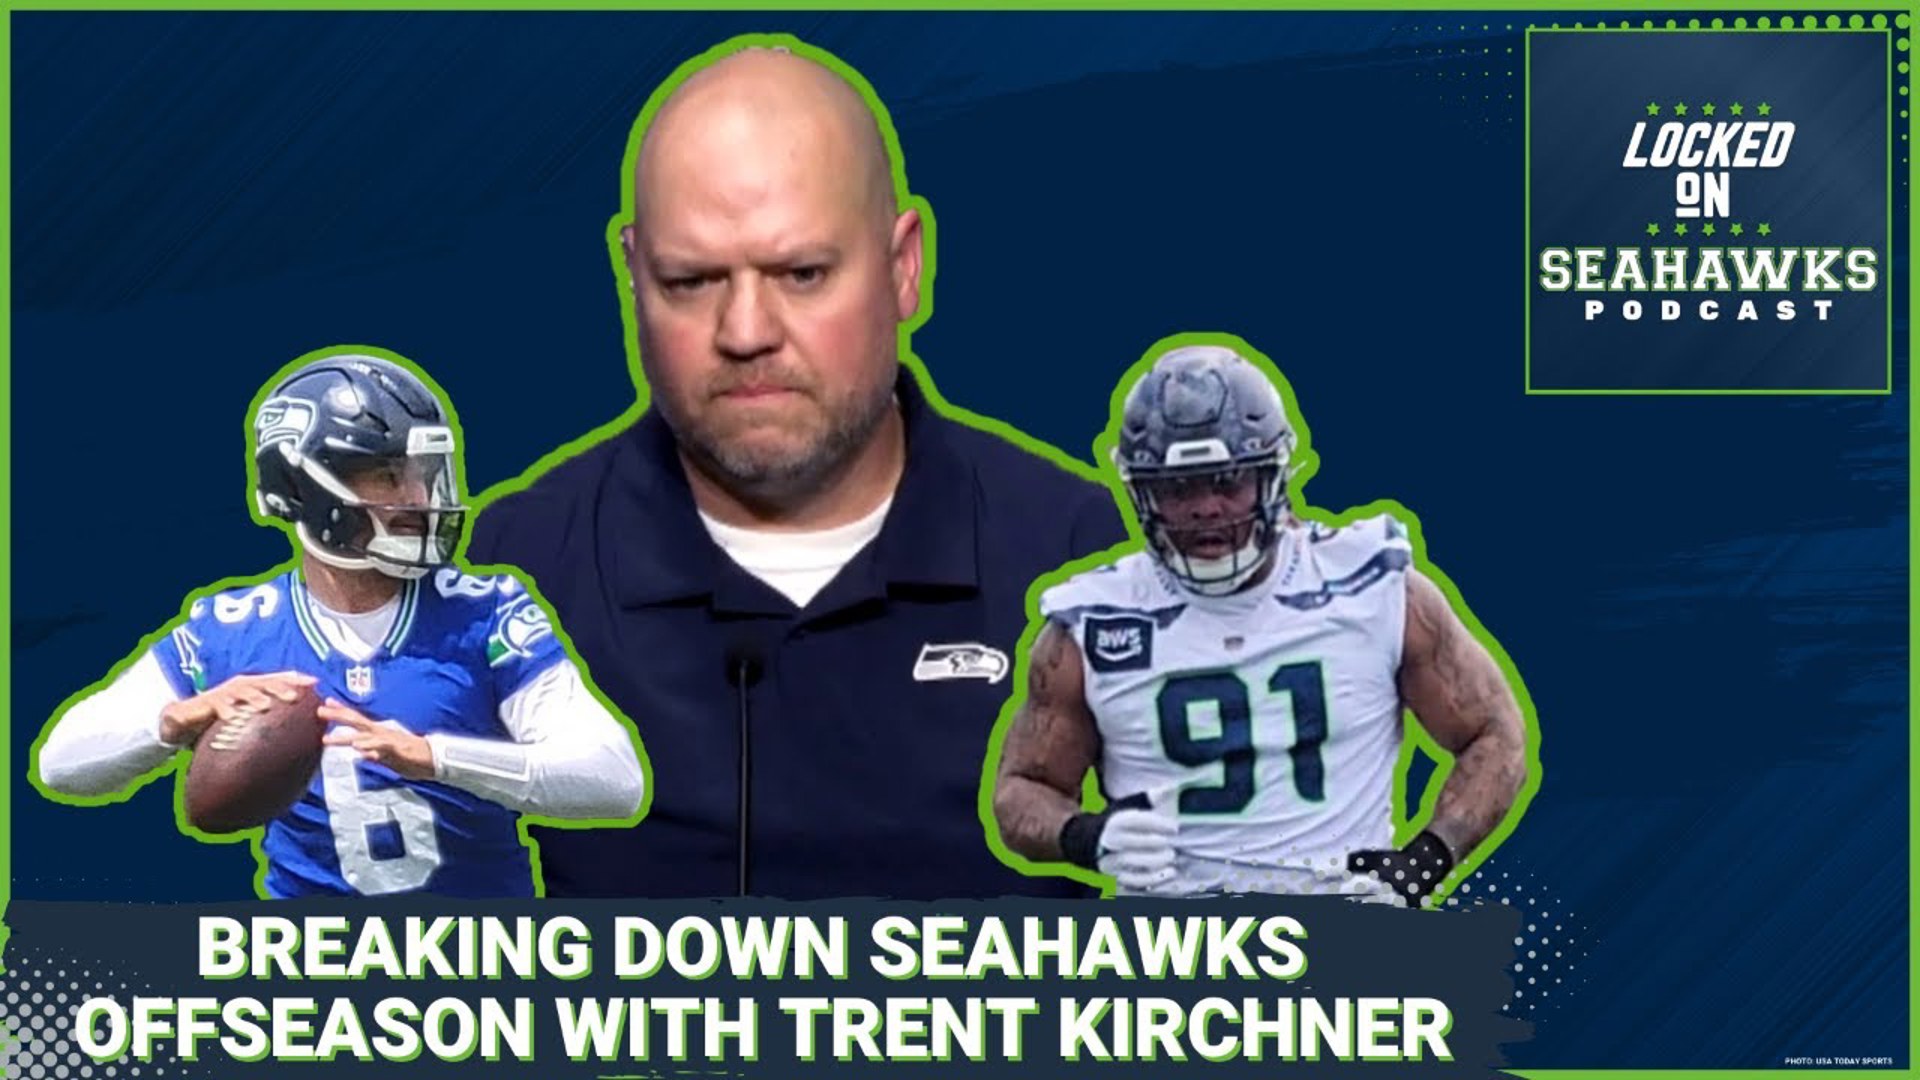 It's been an offseason of unfamiliarity for the Seahawks with a new coaching staff coming on board, but the front office has largely stayed the same